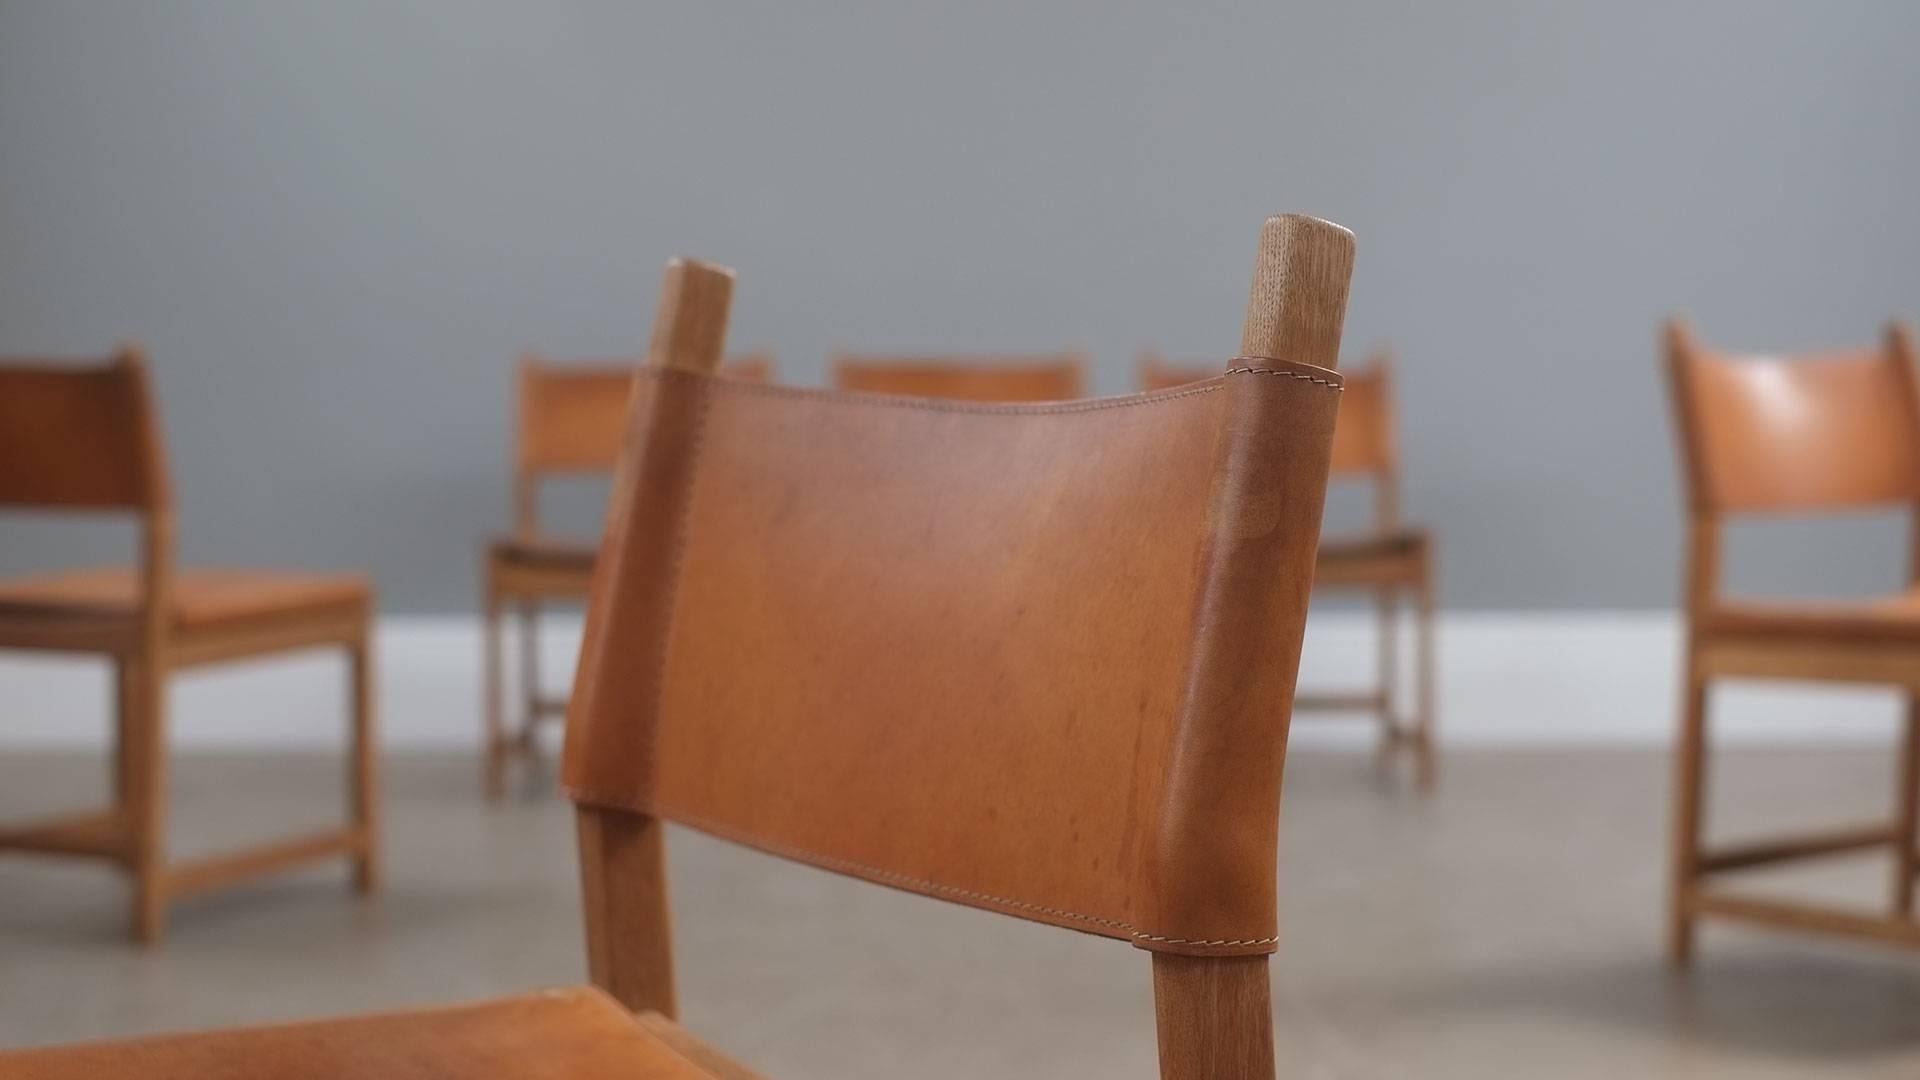 Amazing set of six hunting chairs in solid oak with saddle leather seats and backs designed by Kurt Ostervig, Denmark. Very thick leather with fabulous patina. Wonderful and rare set of chairs.